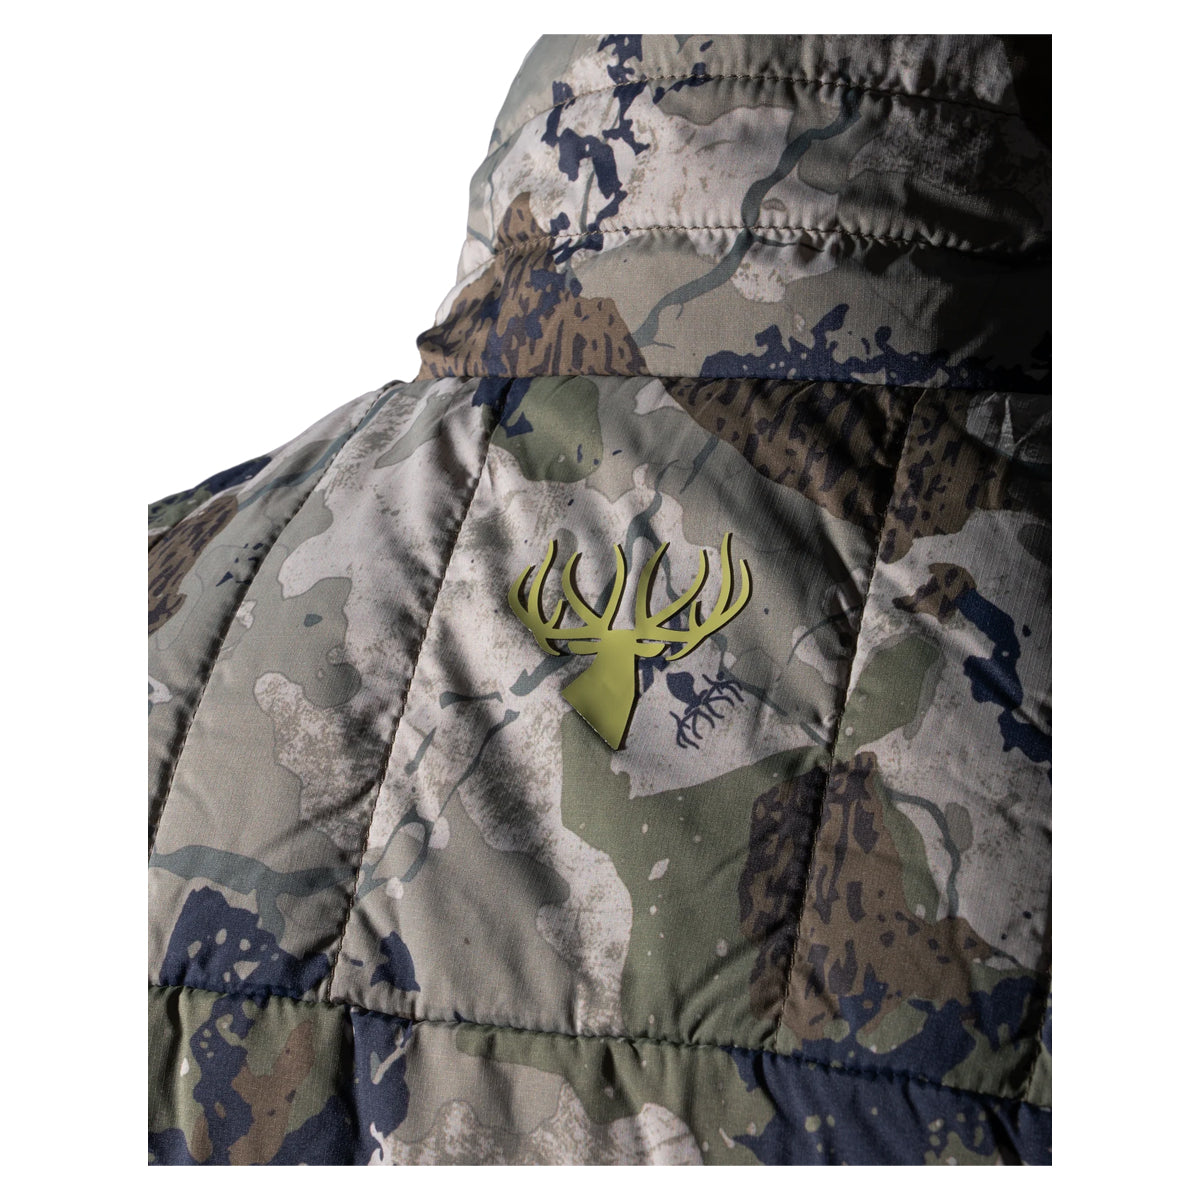 King's XKG Transition Jacket in  by GOHUNT | King's - GOHUNT Shop